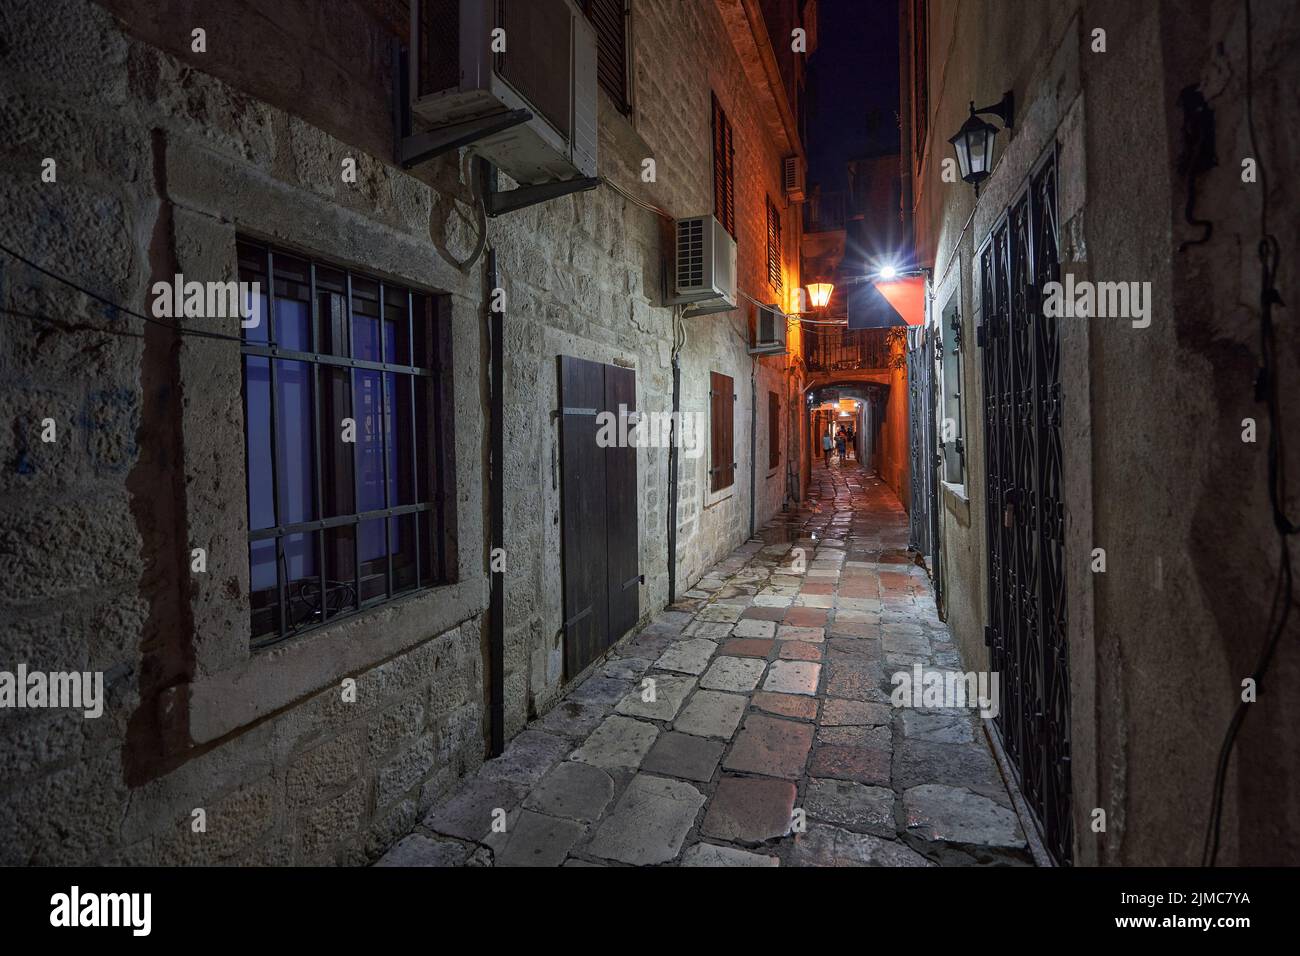 Narrow street of the old town of Kotor at night in Montenegro. Stock Photo